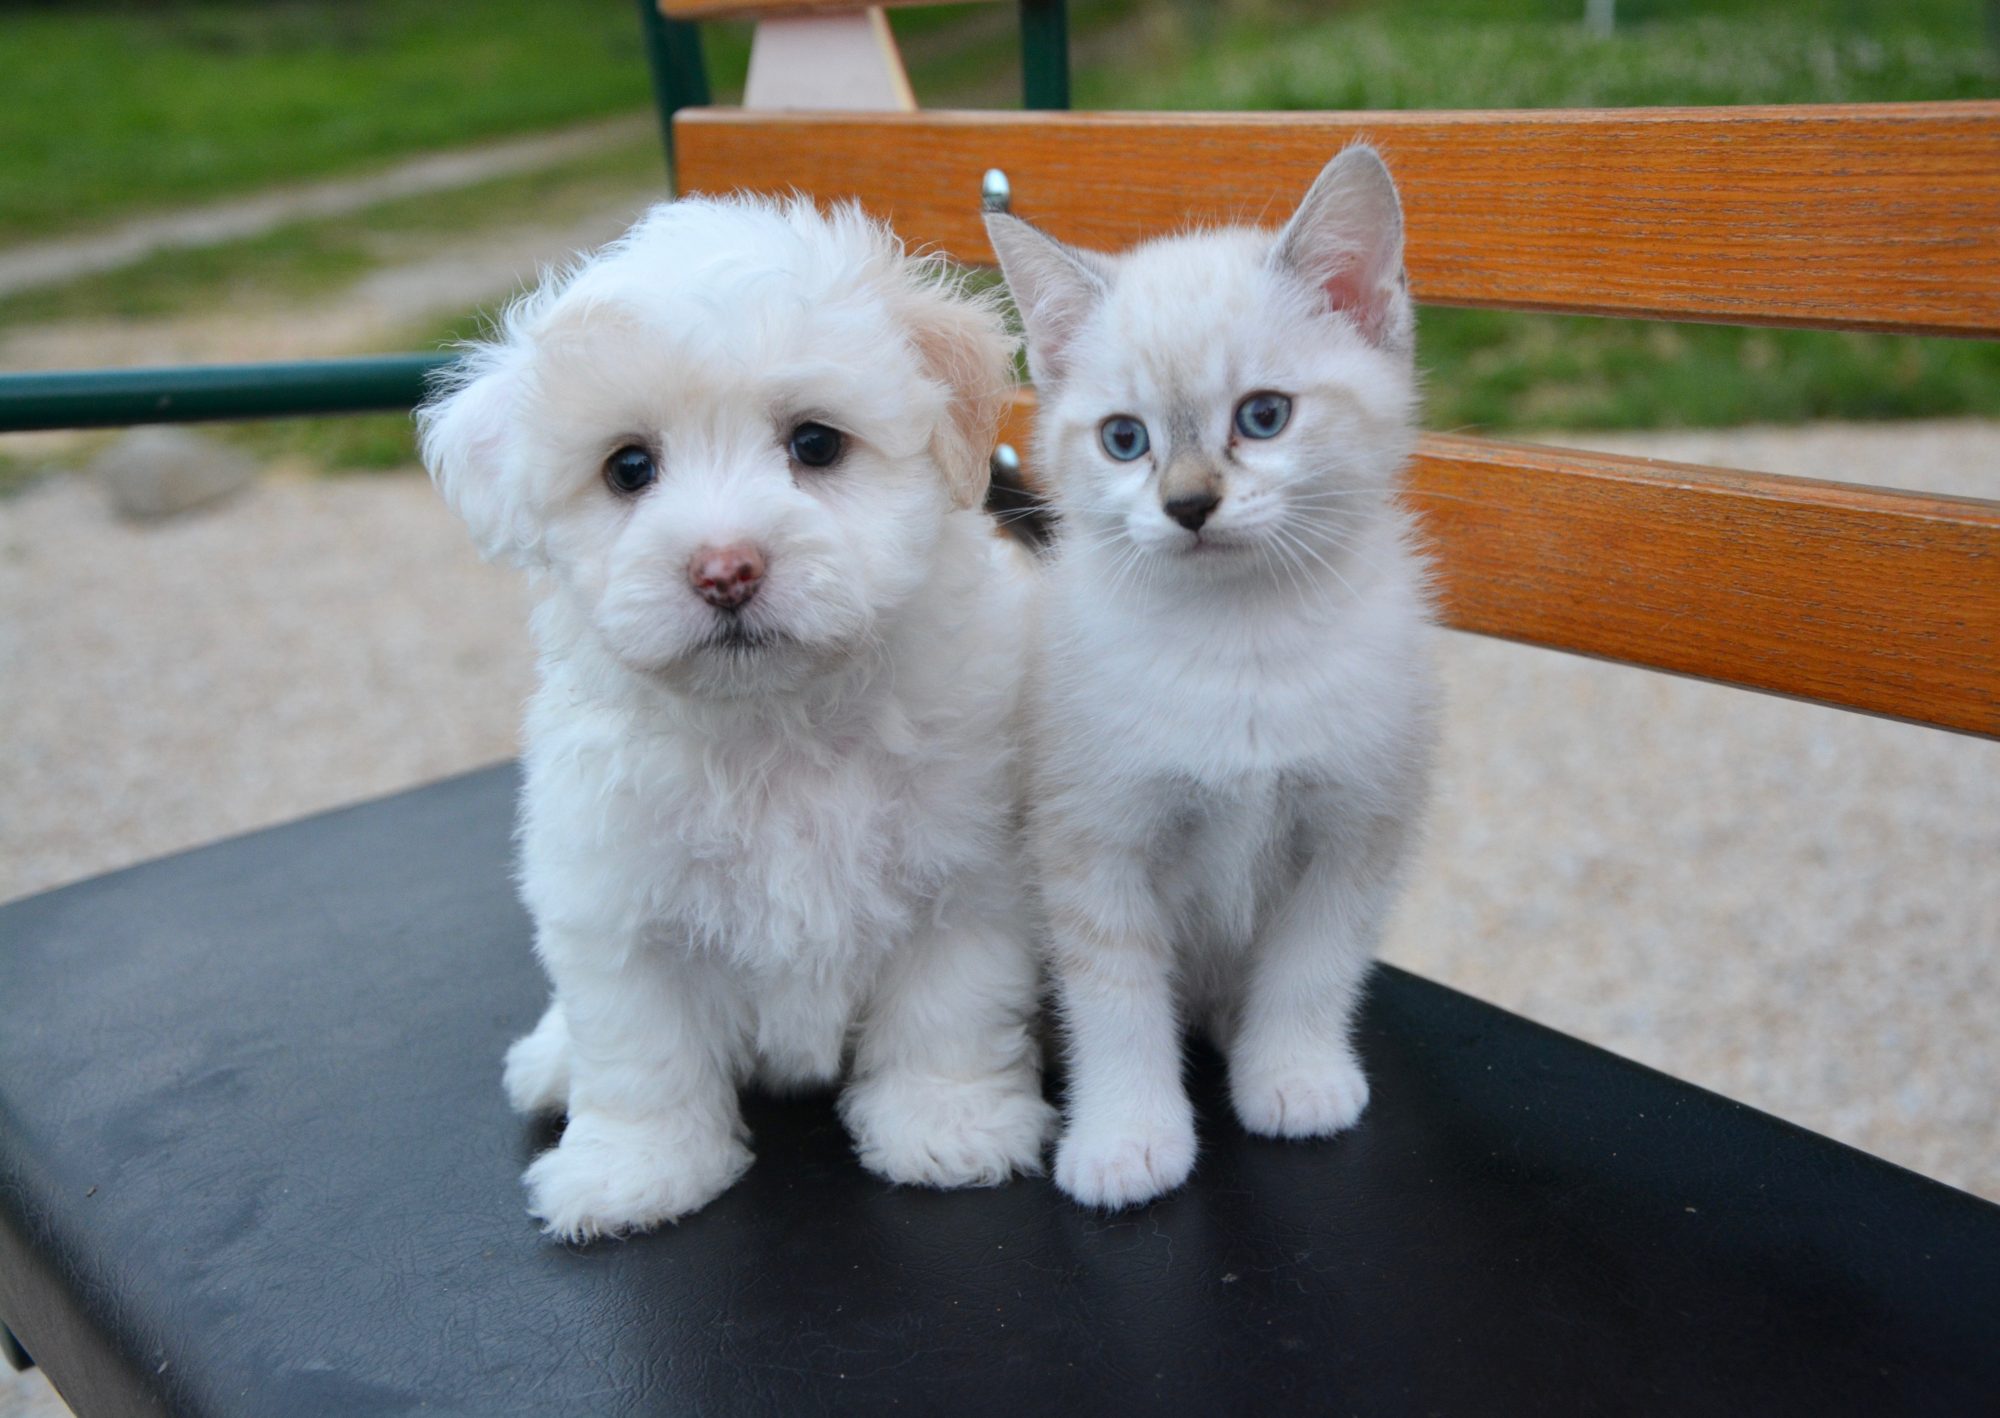 A white kitten and puppy